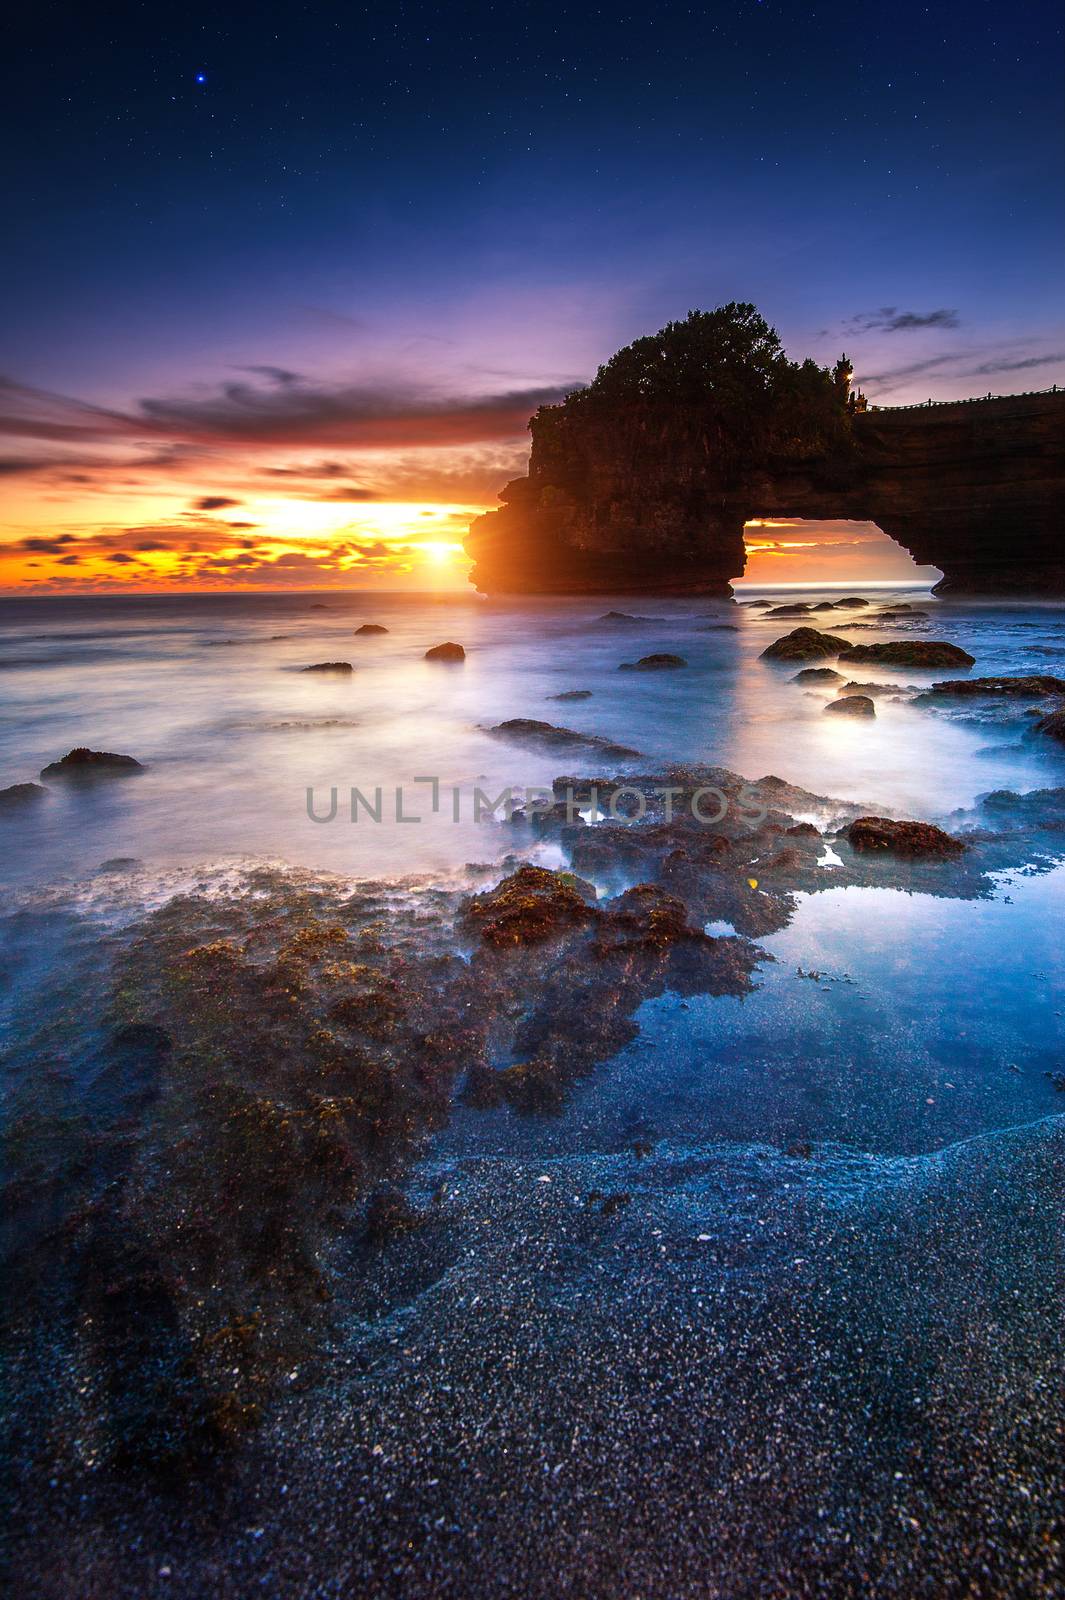 Tanah Lot Temple at sunset in Bali, Indonesia. by gutarphotoghaphy